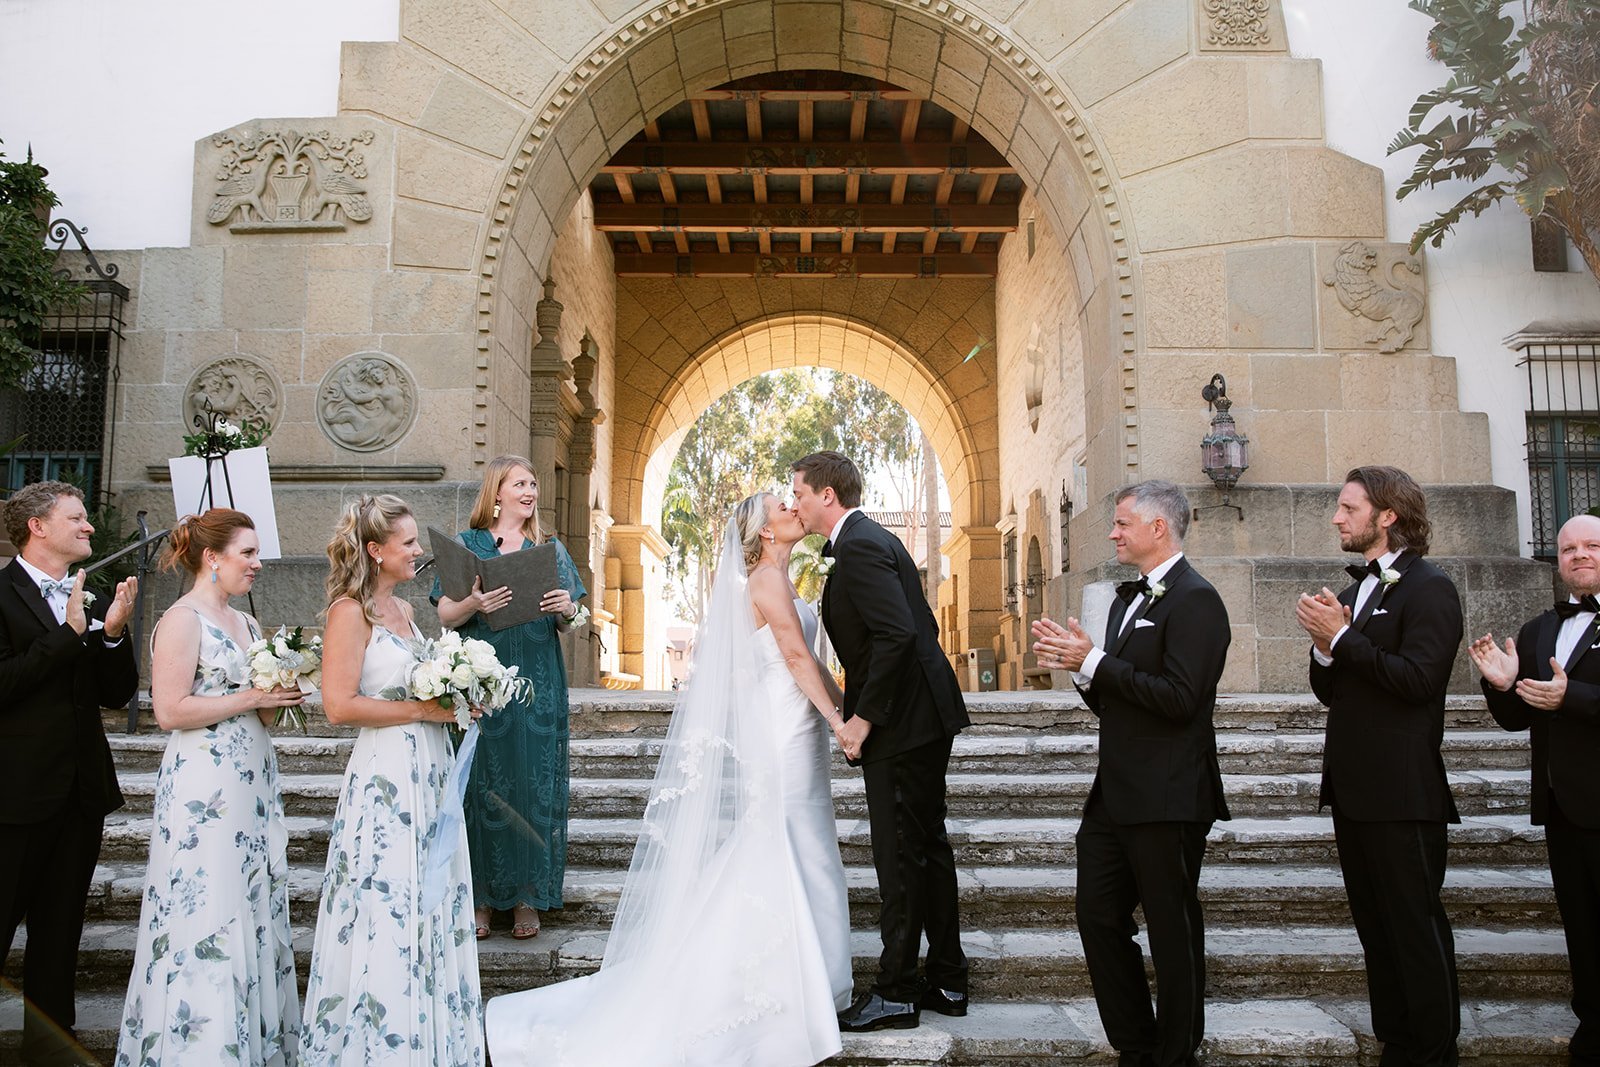 www.santabarbarawedding.com | Santa Barbara Courthouse | Amazing Days Events | Anna Delores Photography | Anna Le Pley Taylor | Ventura Rentals | Anne Barge | Couple Kisses at Ceremony 